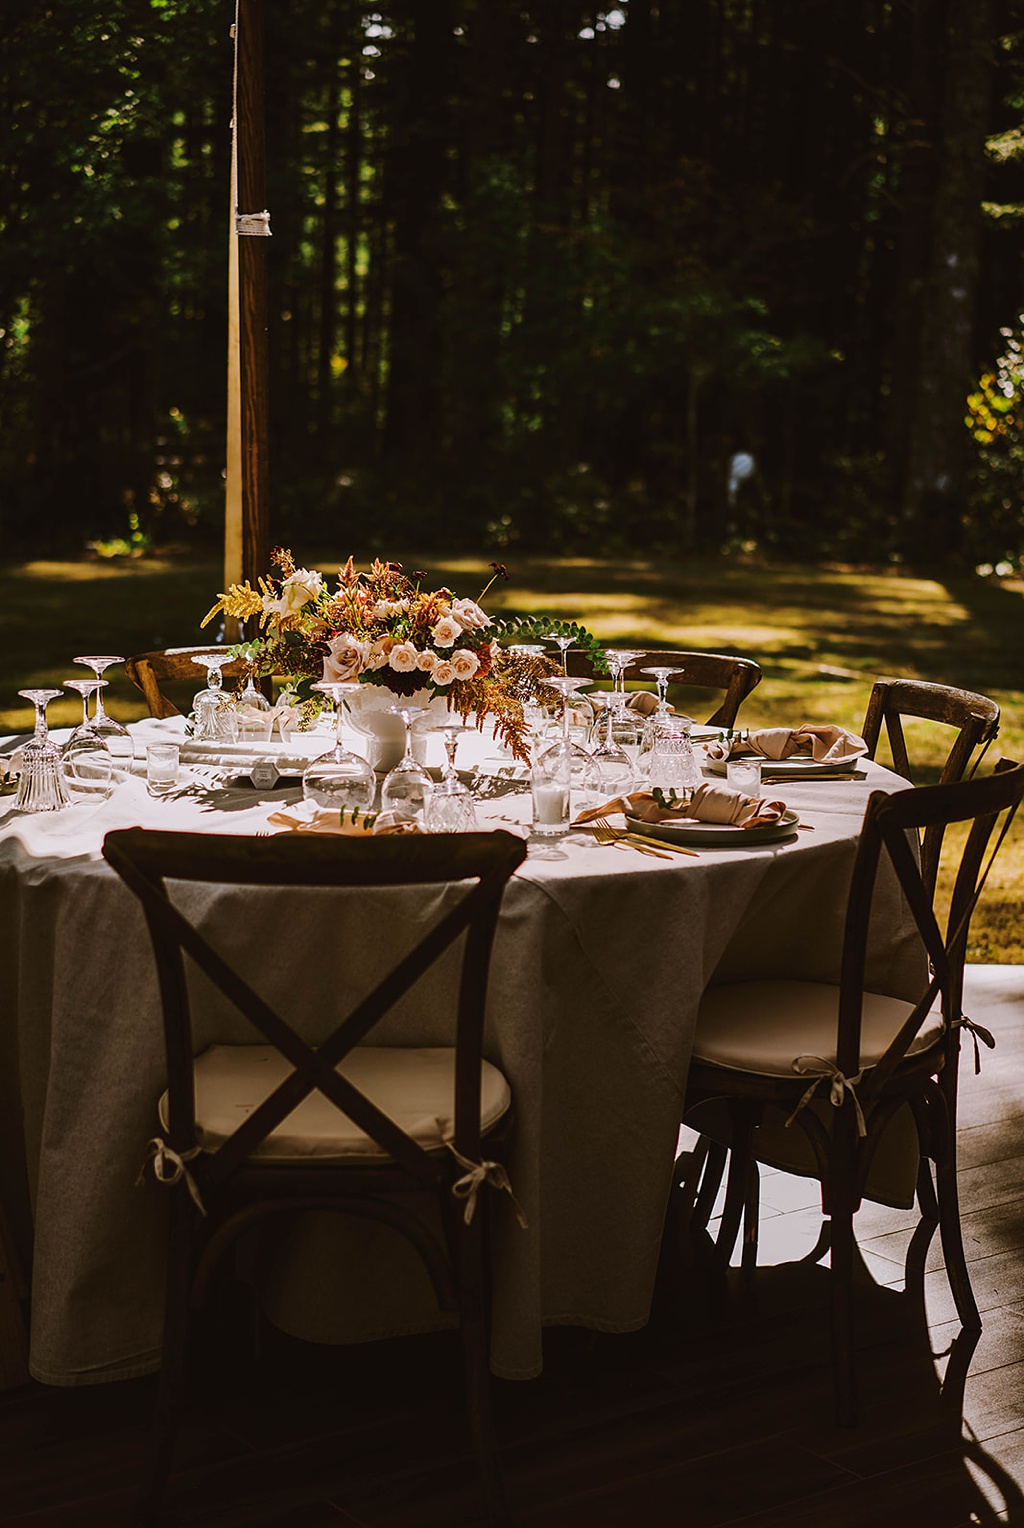 A moody shot of a summer wedding table in the sun and shade